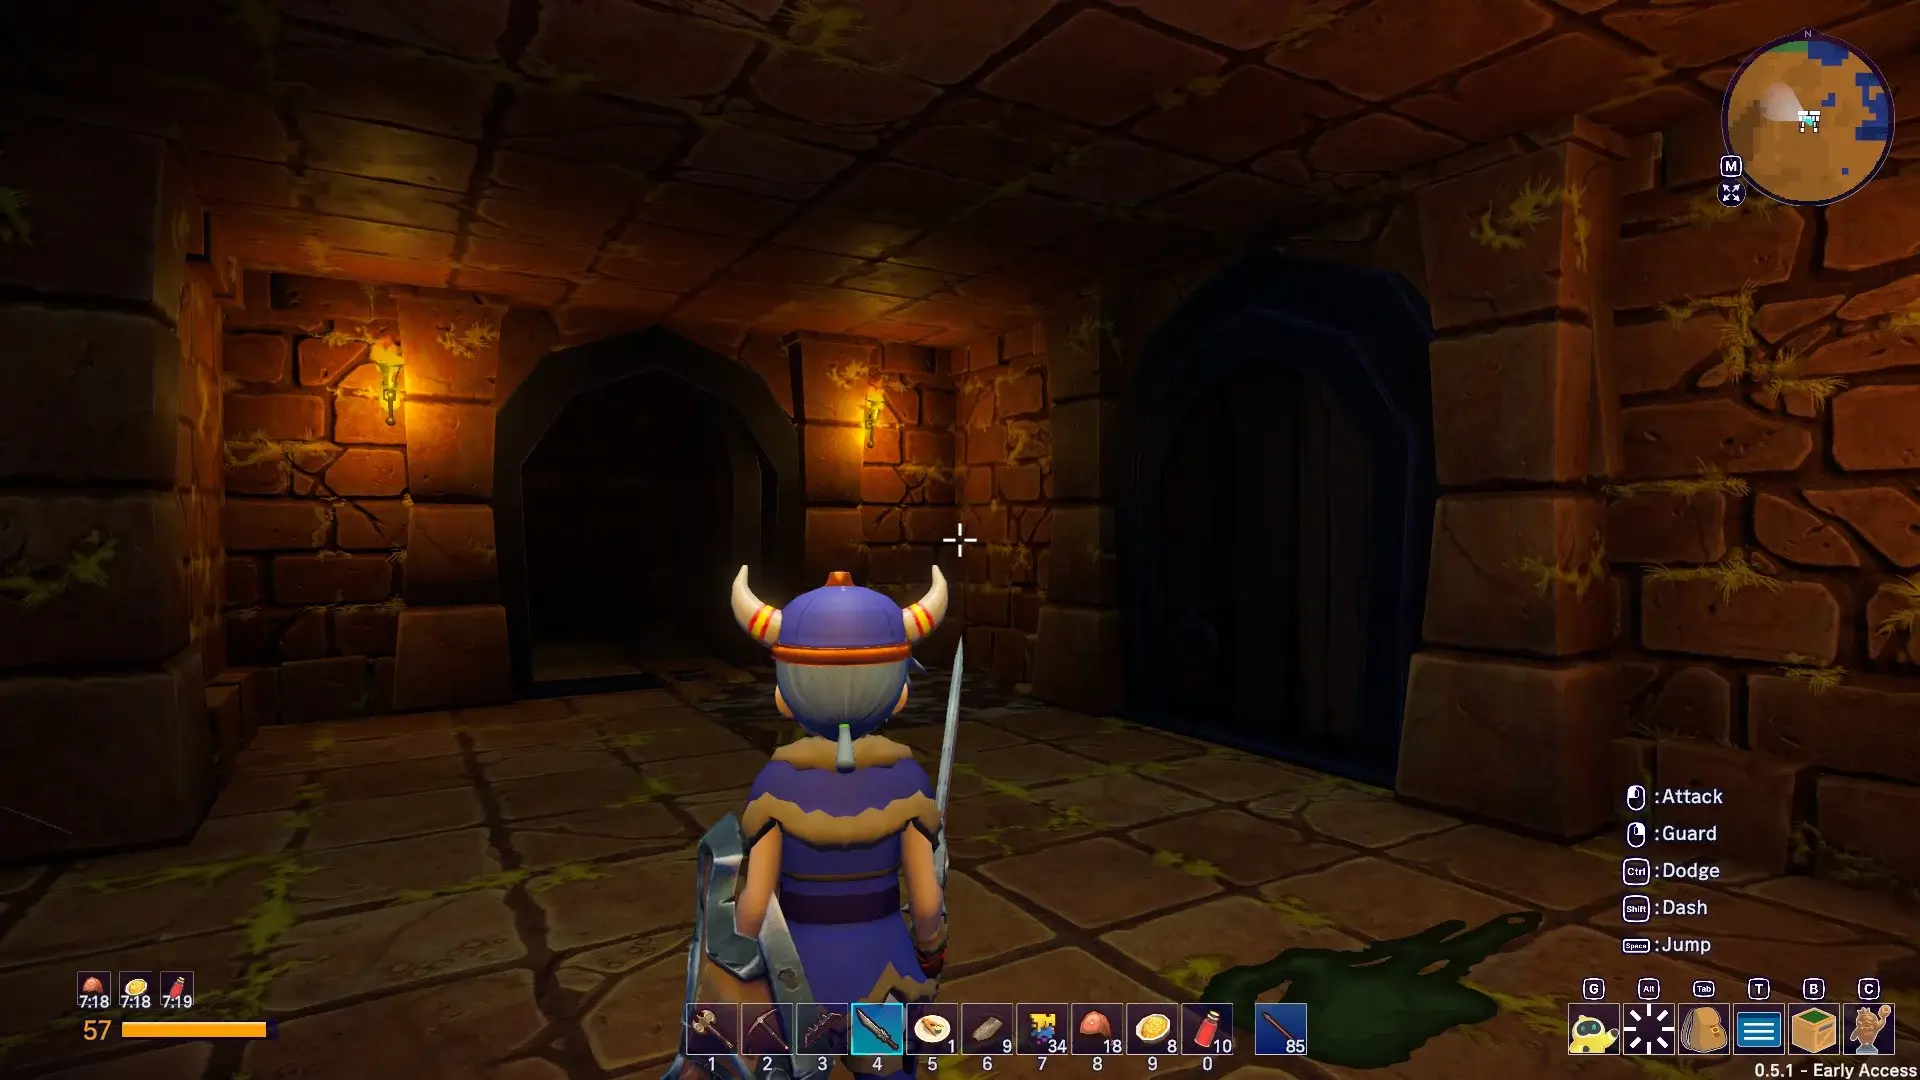 Inside one of the dungeons in the wilds. The player character is in upgraded equipment.